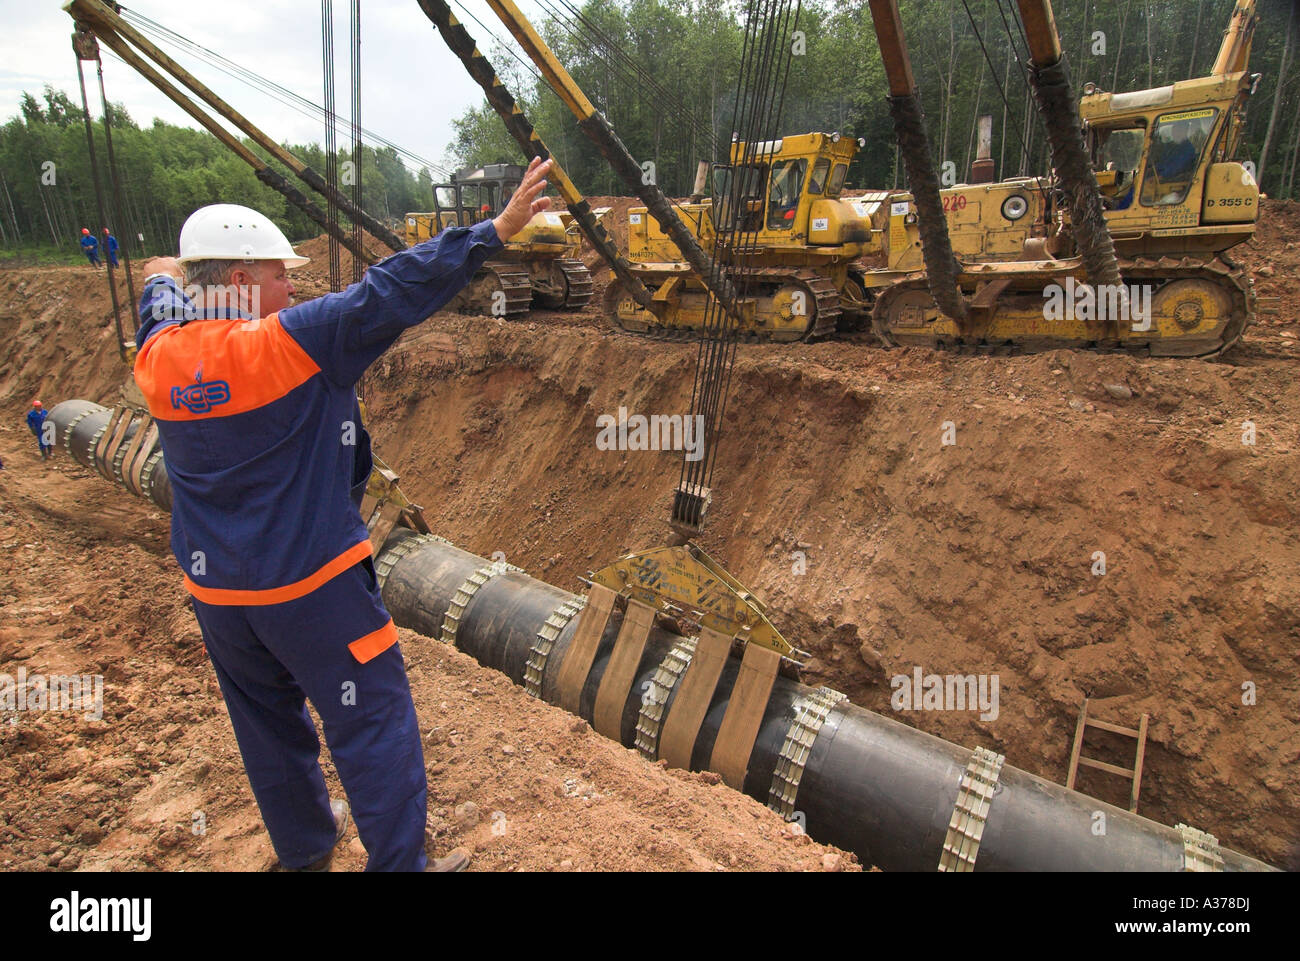 At the building site of the North Europen gas pipeline Russian federation Leningrad region 2006 06 21 Stock Photo